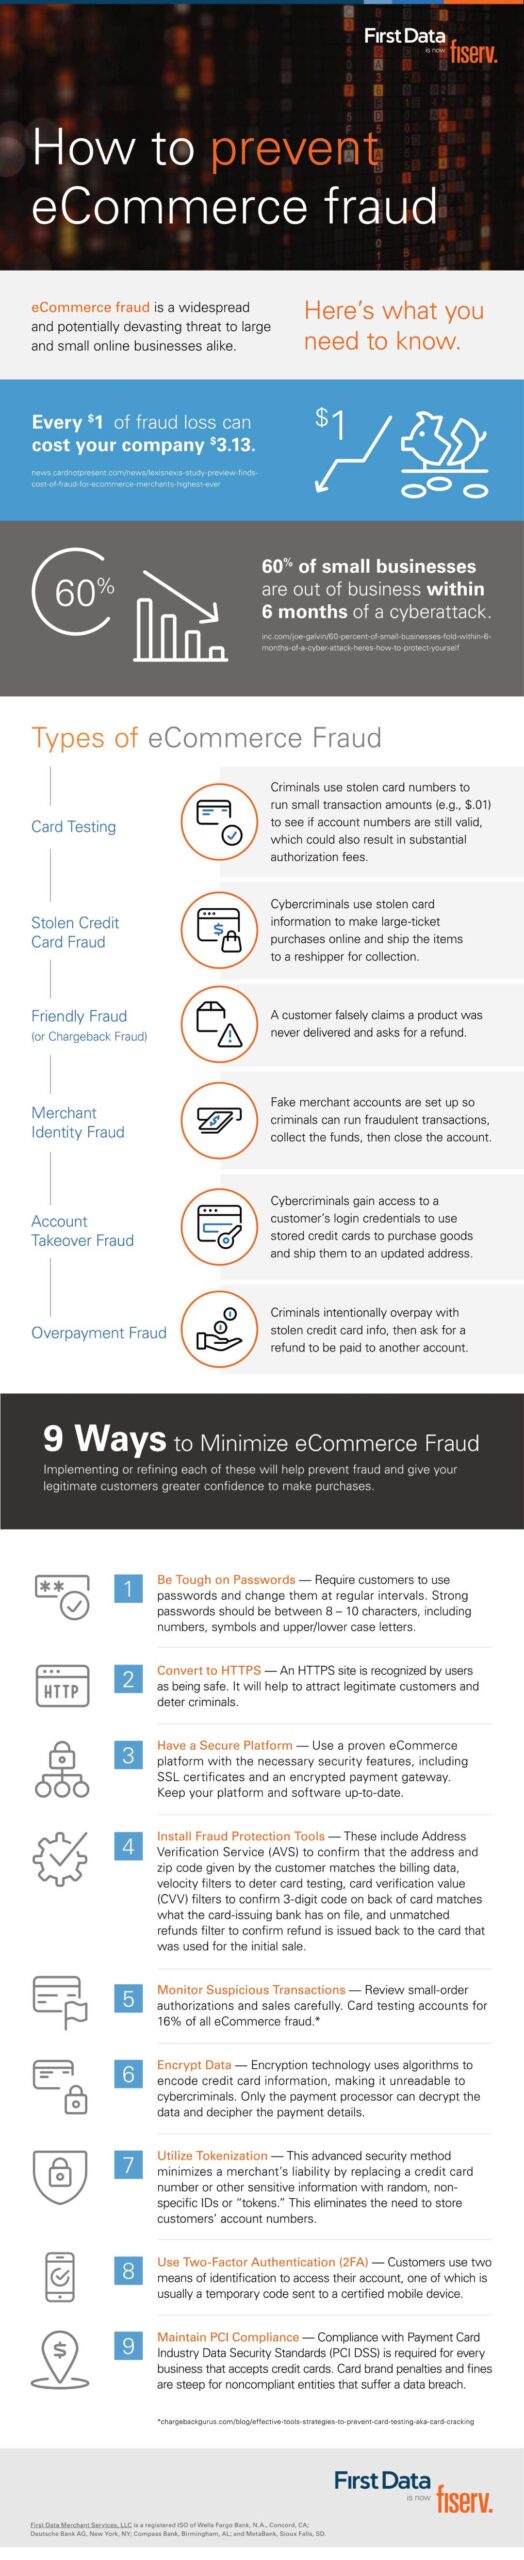 How To Prevent eCommerce Fraud